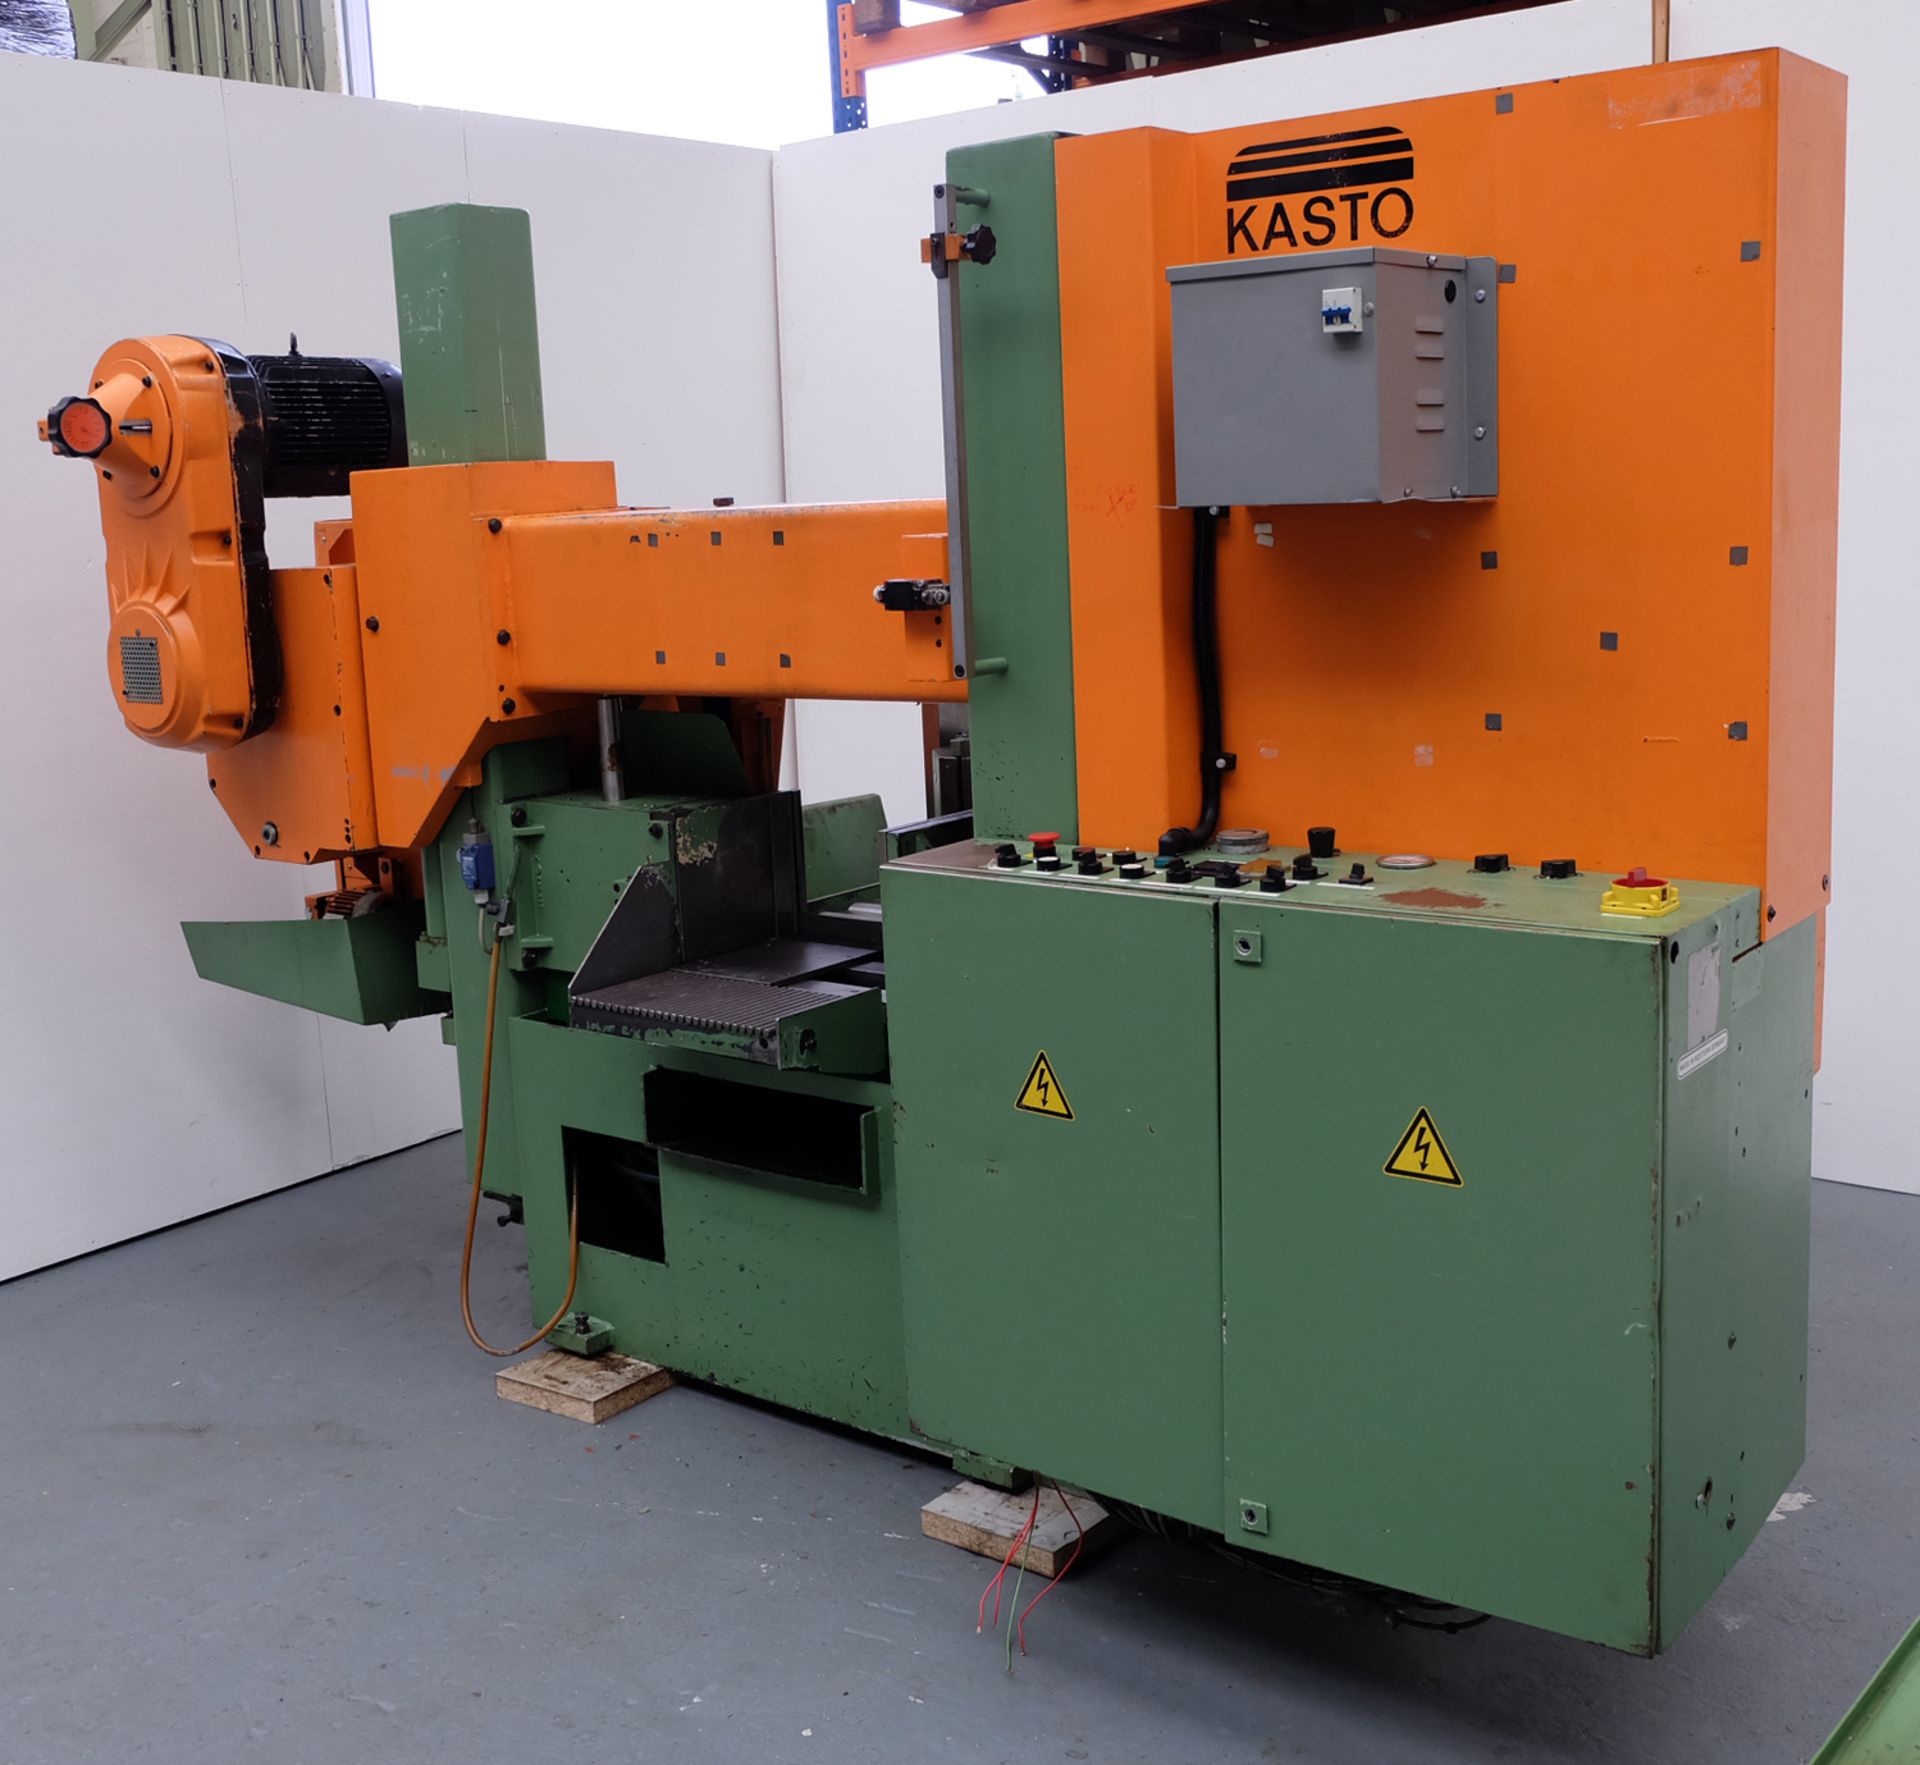 KASTO HBA 420 AU Heavy Duty Automatic Horizontal Band Sawing Machine.Ideal for Billet & Bar Cutting. - Image 2 of 17